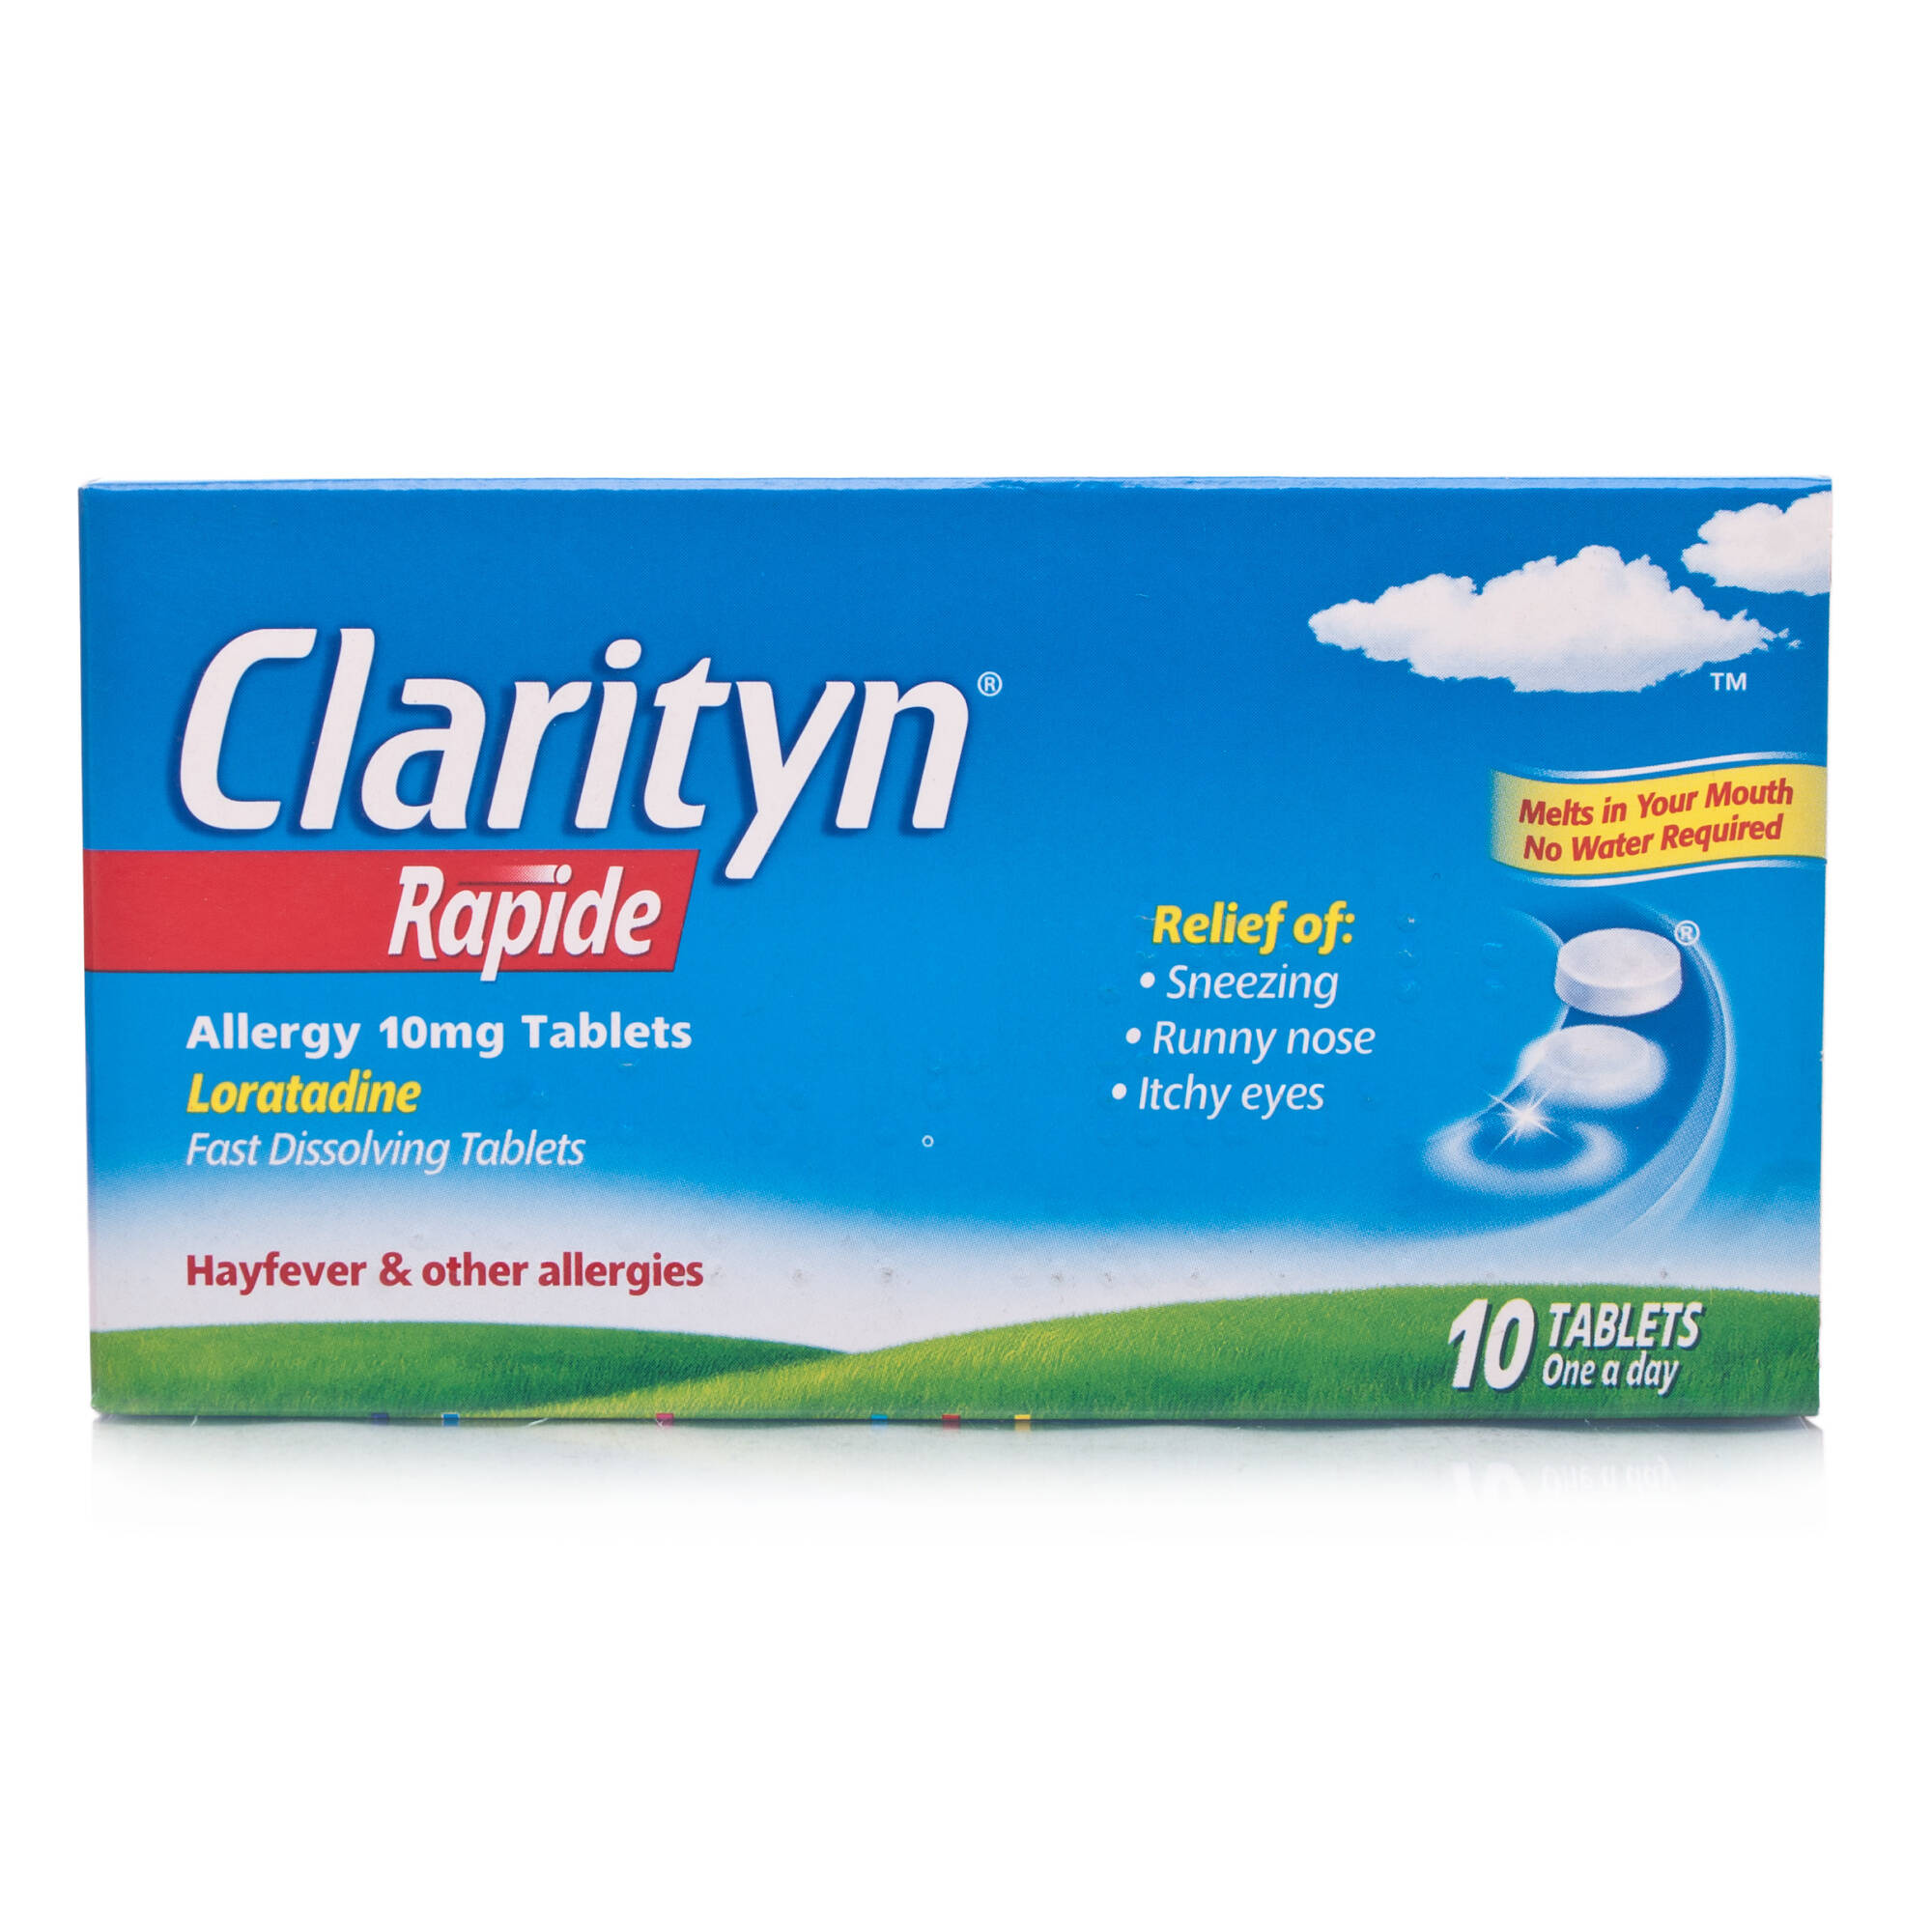 Clarityn Rapide Allergy 10mg Tablets